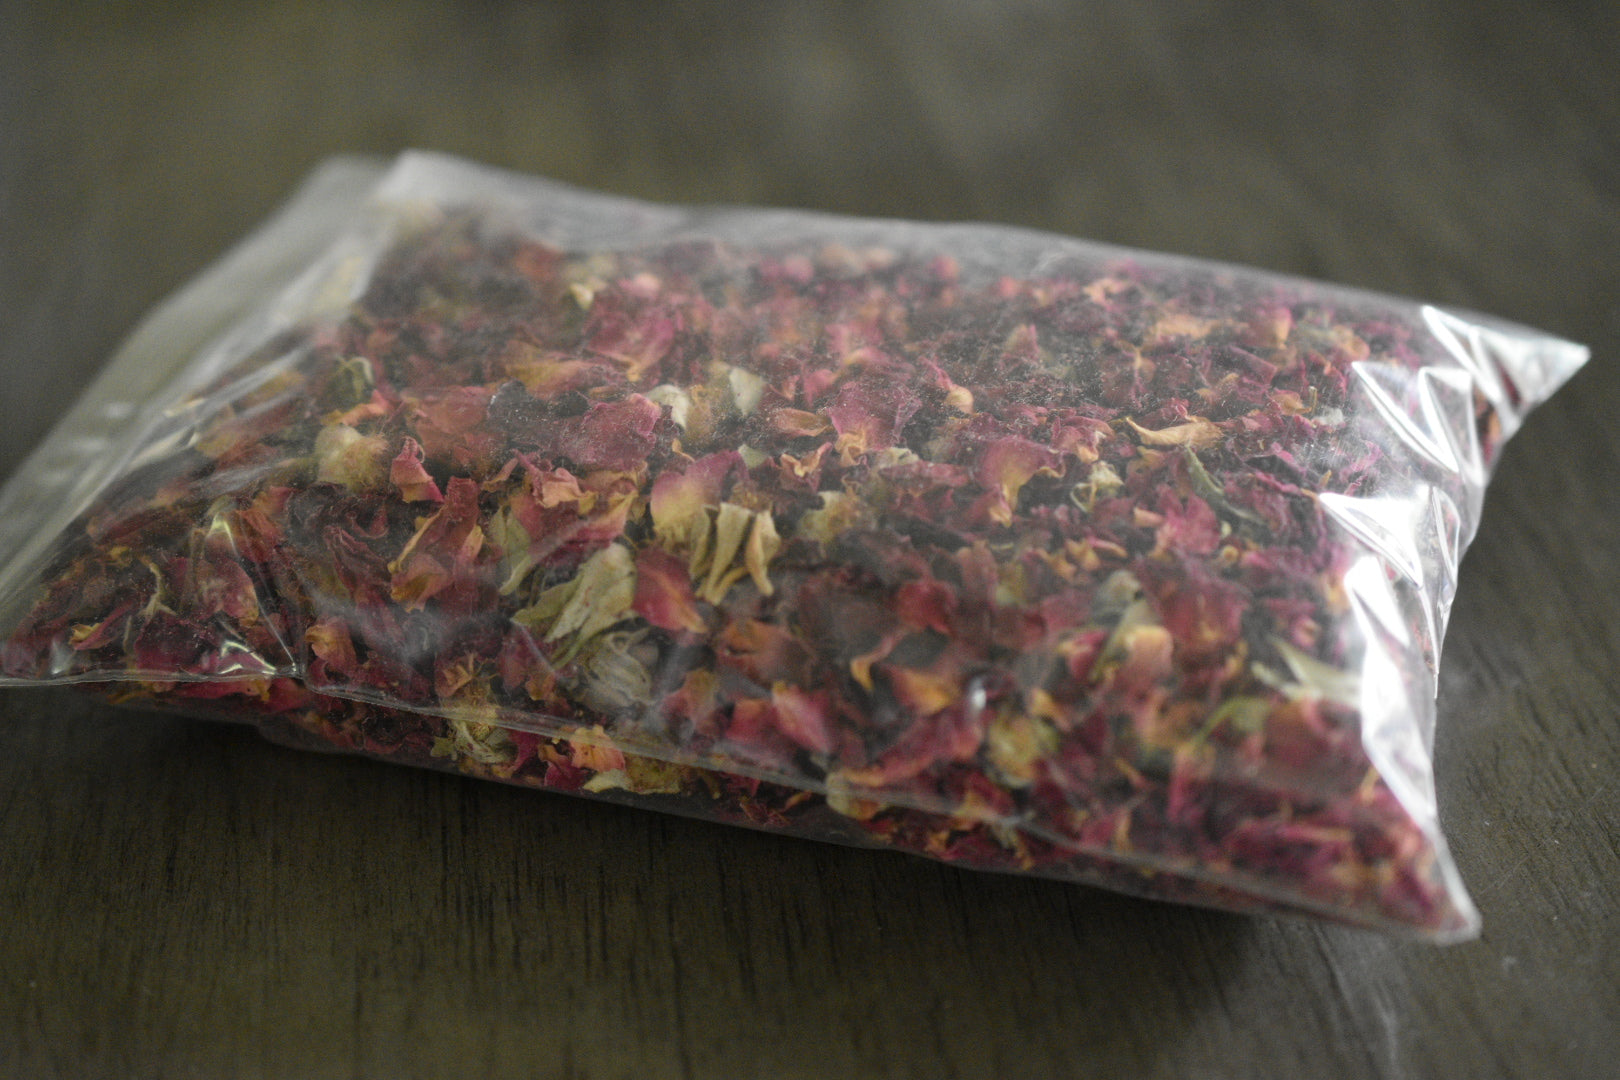 Dried Rose Petals and Buds